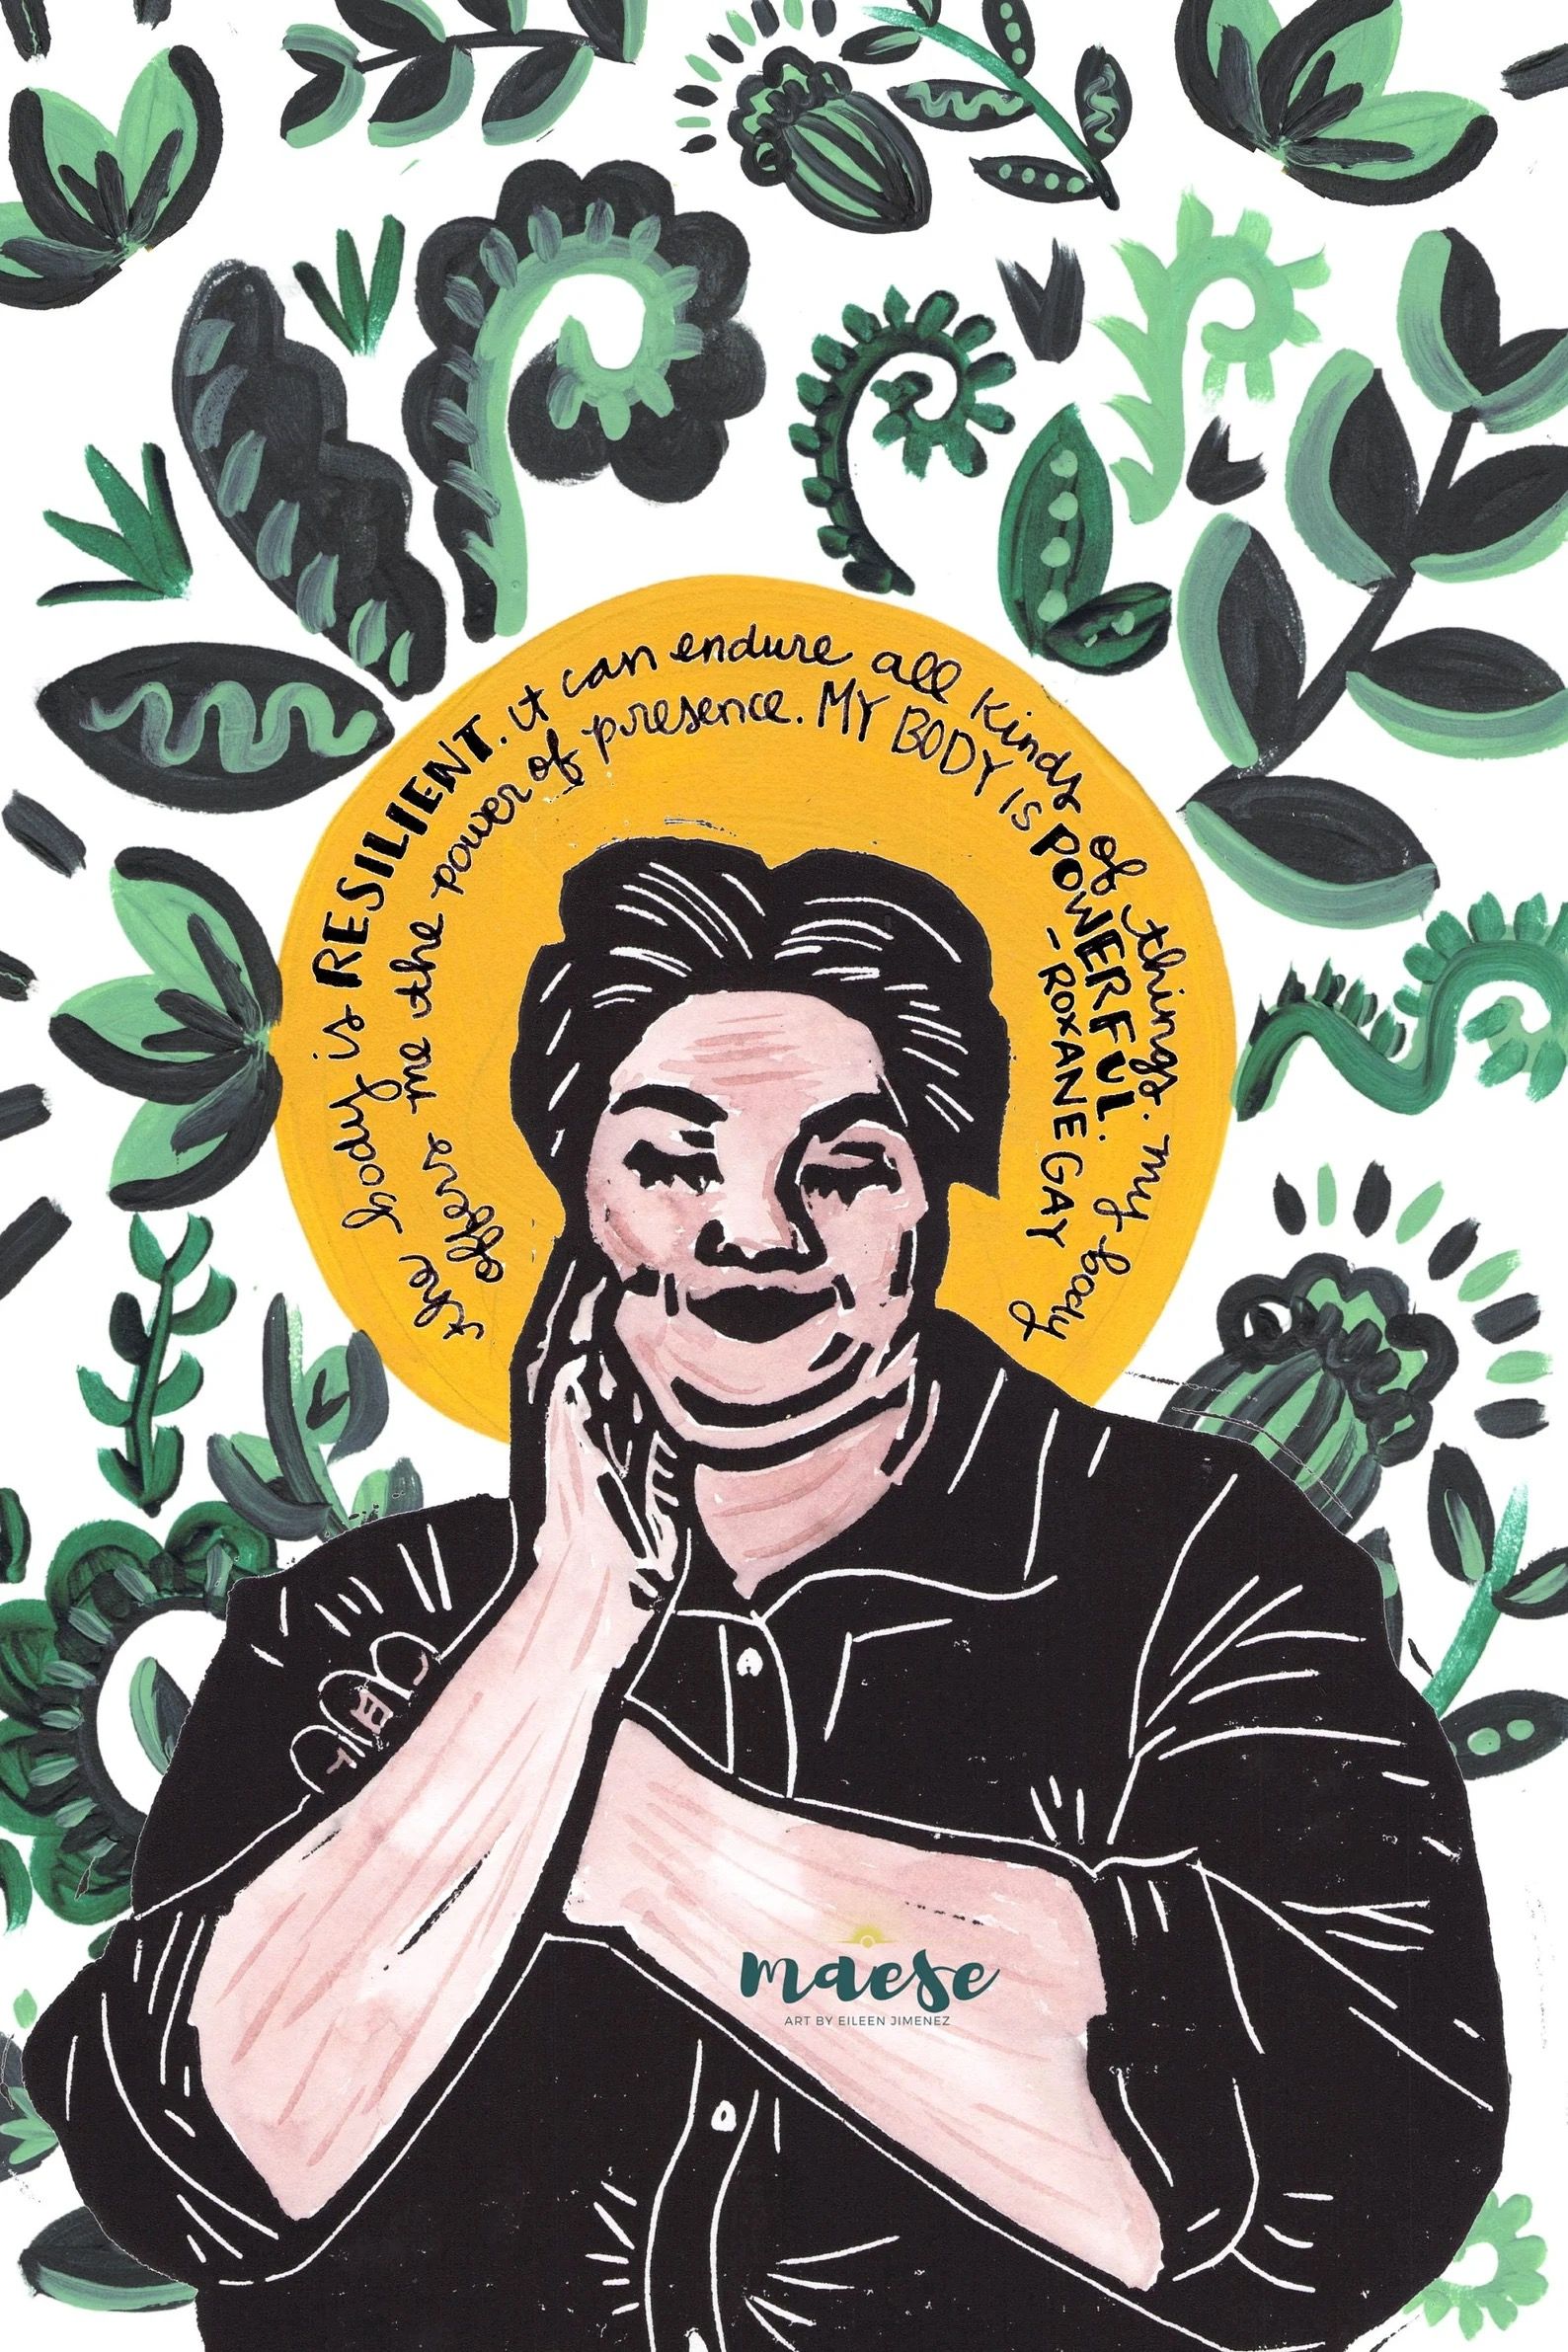 Postcard with a print of Roxane Gay. Her eyes are closed and she's resting her hand on her chin. Behind her are green leaves and vines, and a golden circle behind her hand contains a quote.